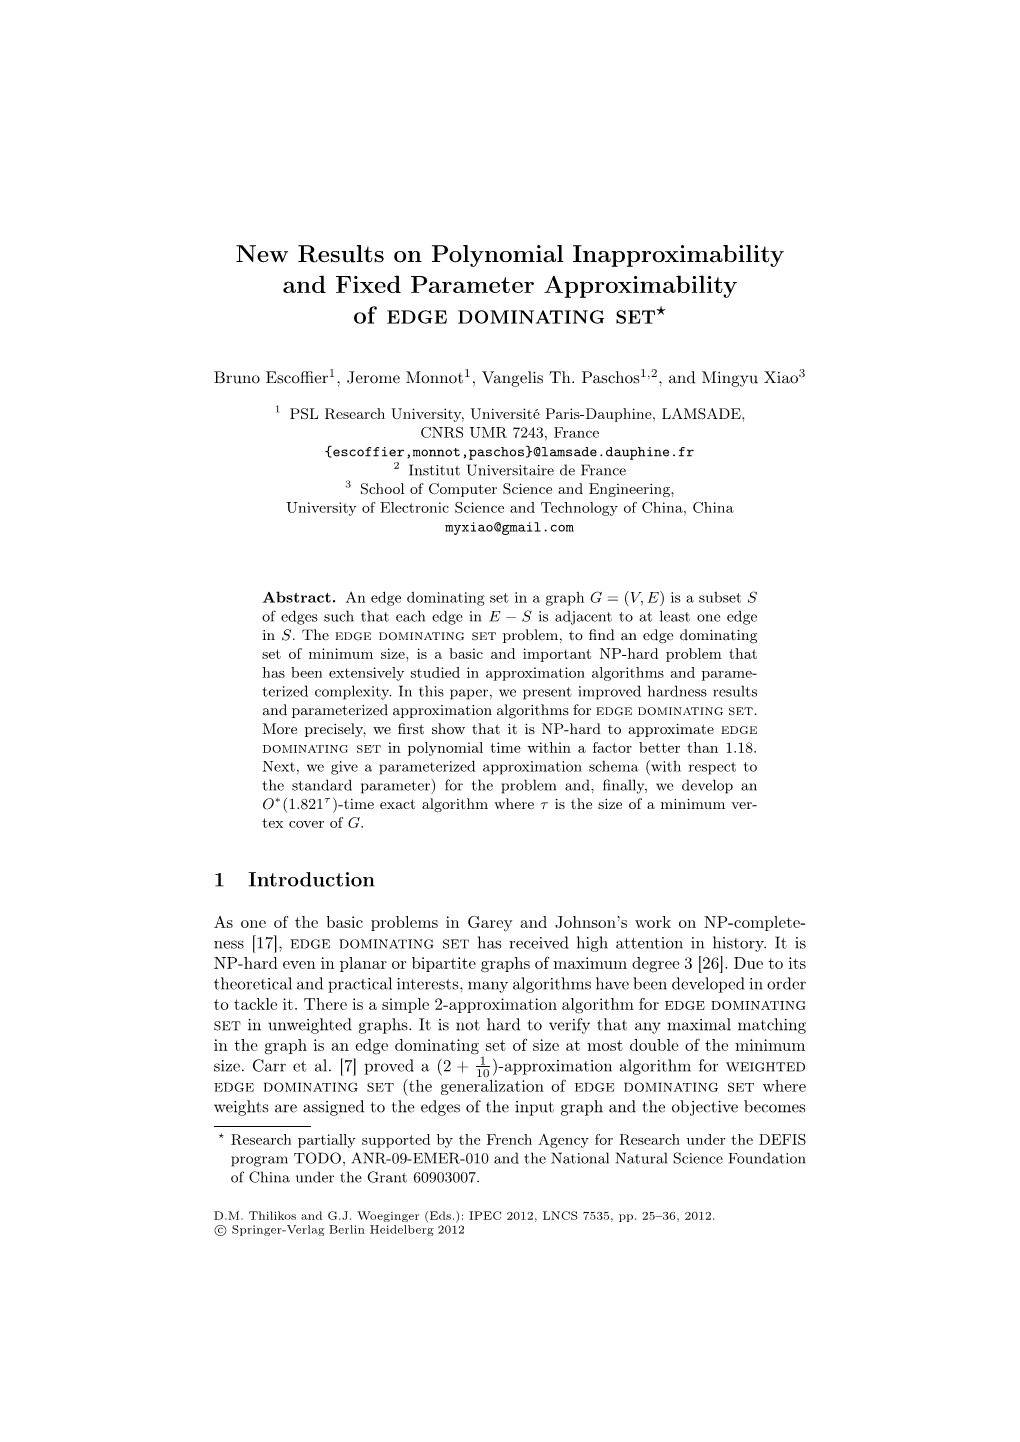 New Results on Polynomial Inapproximability and Fixed Parameter Approximability of Edge Dominating Set